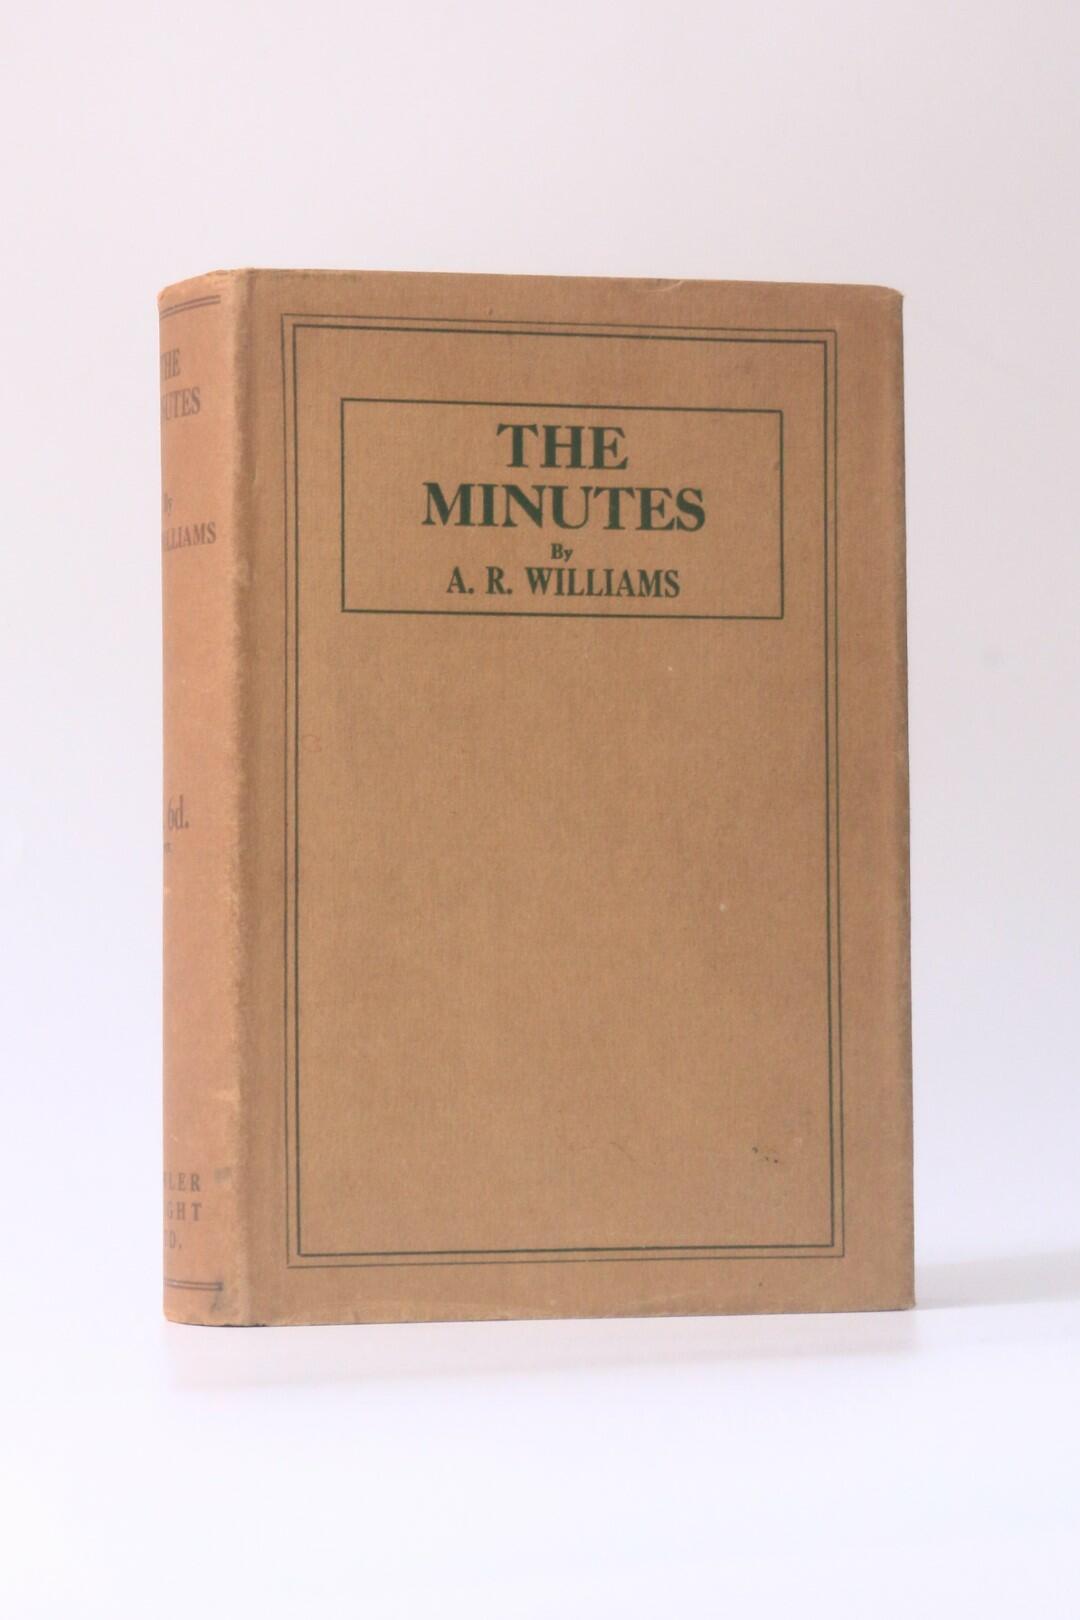 A.R. Williams - The Minutes - Fowler Wright Ltd, 1928, First Edition.